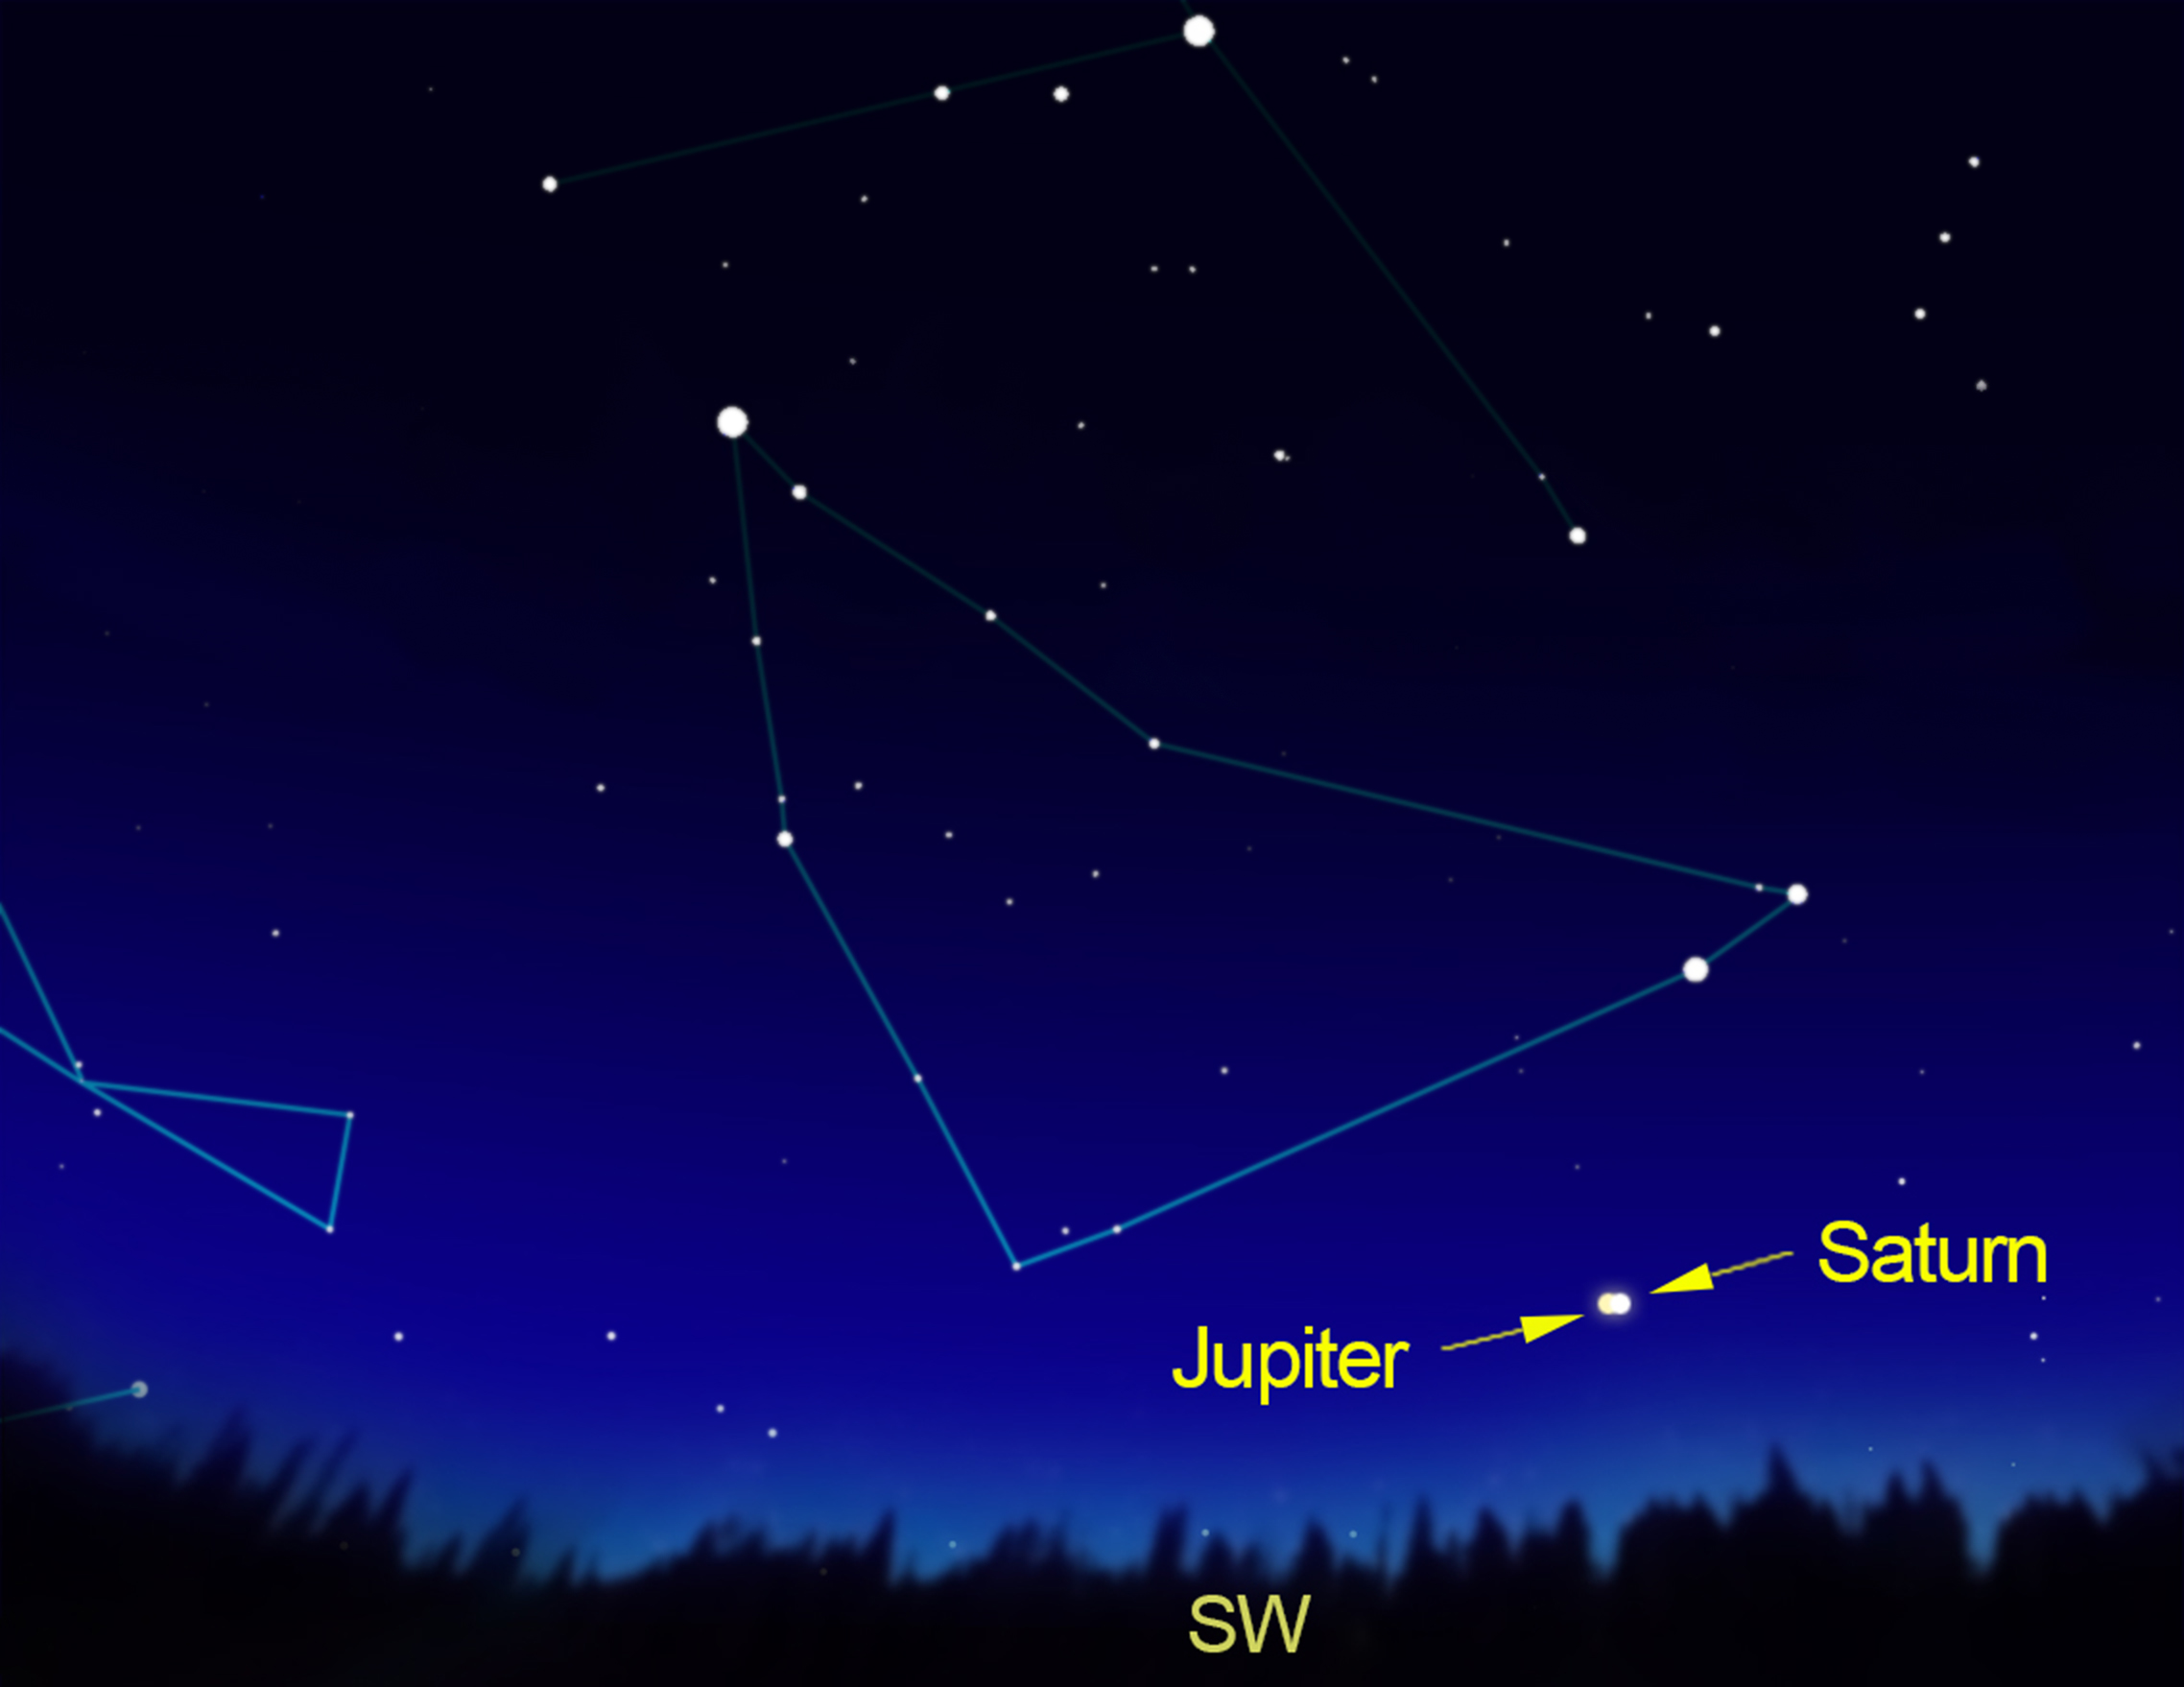 Extraordinary Alignment to Grace the Night Sky for First Time